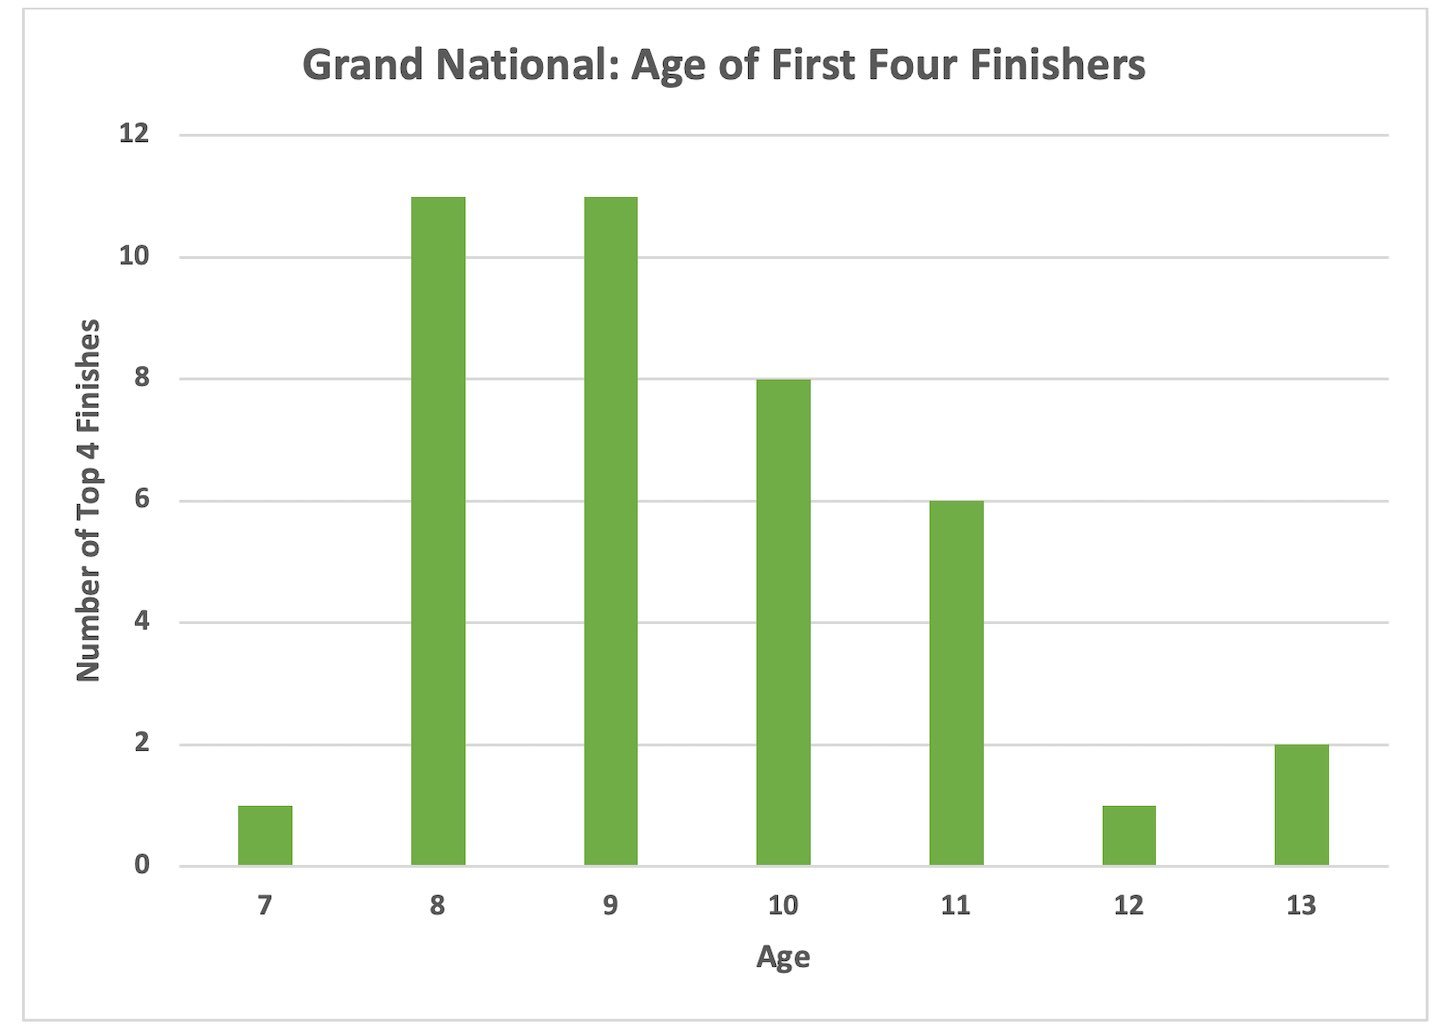 Grand national 10 Year Age Trends